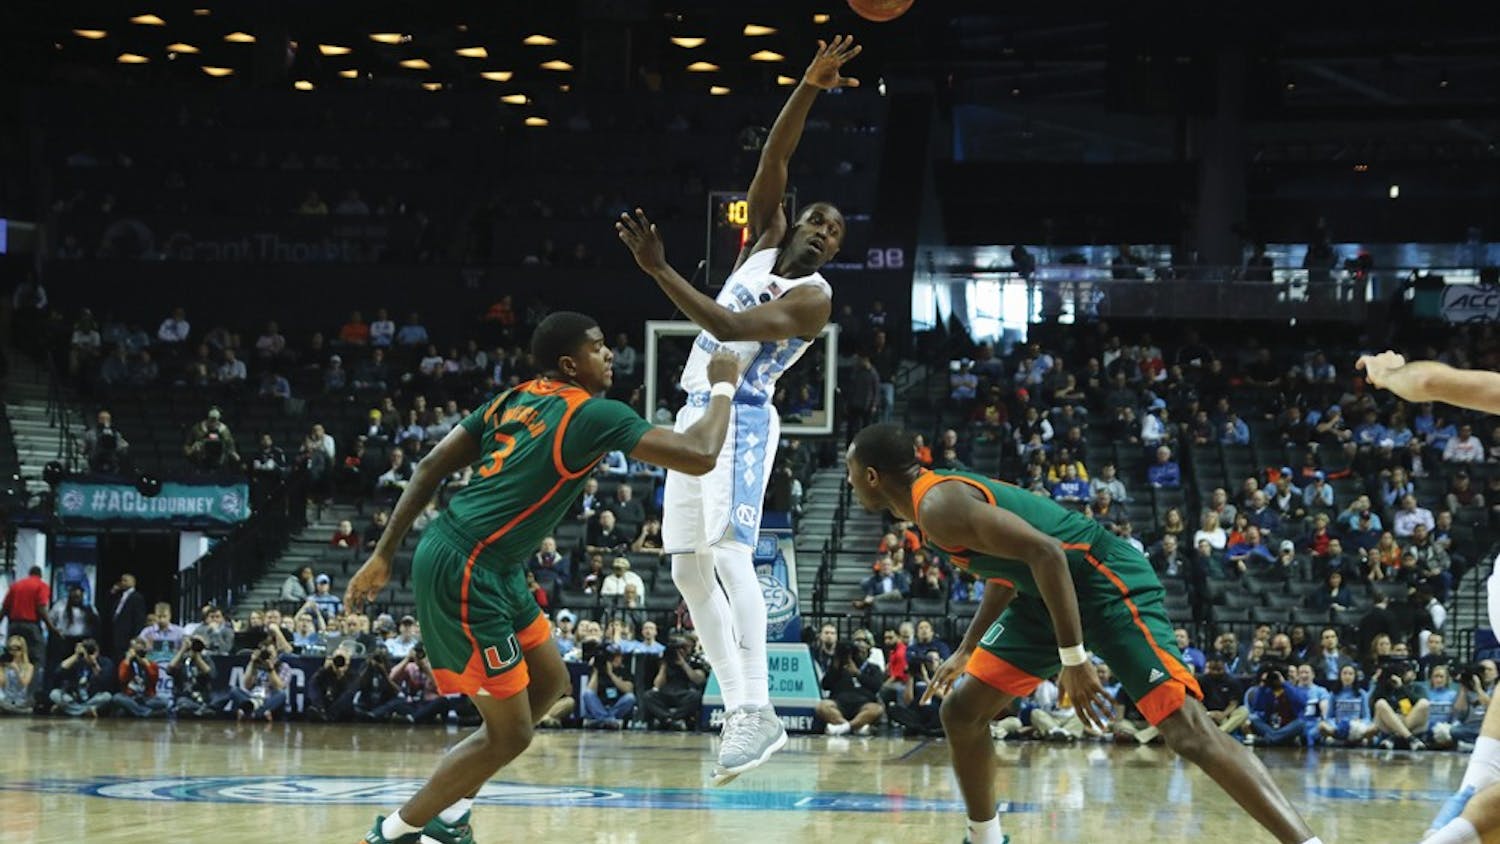 North Carolina wing Theo Pinson (1) throws a pass over Miami defenders in the quarterfinals of the ACC Tournament in Brooklyn, N.Y. on Thursday.